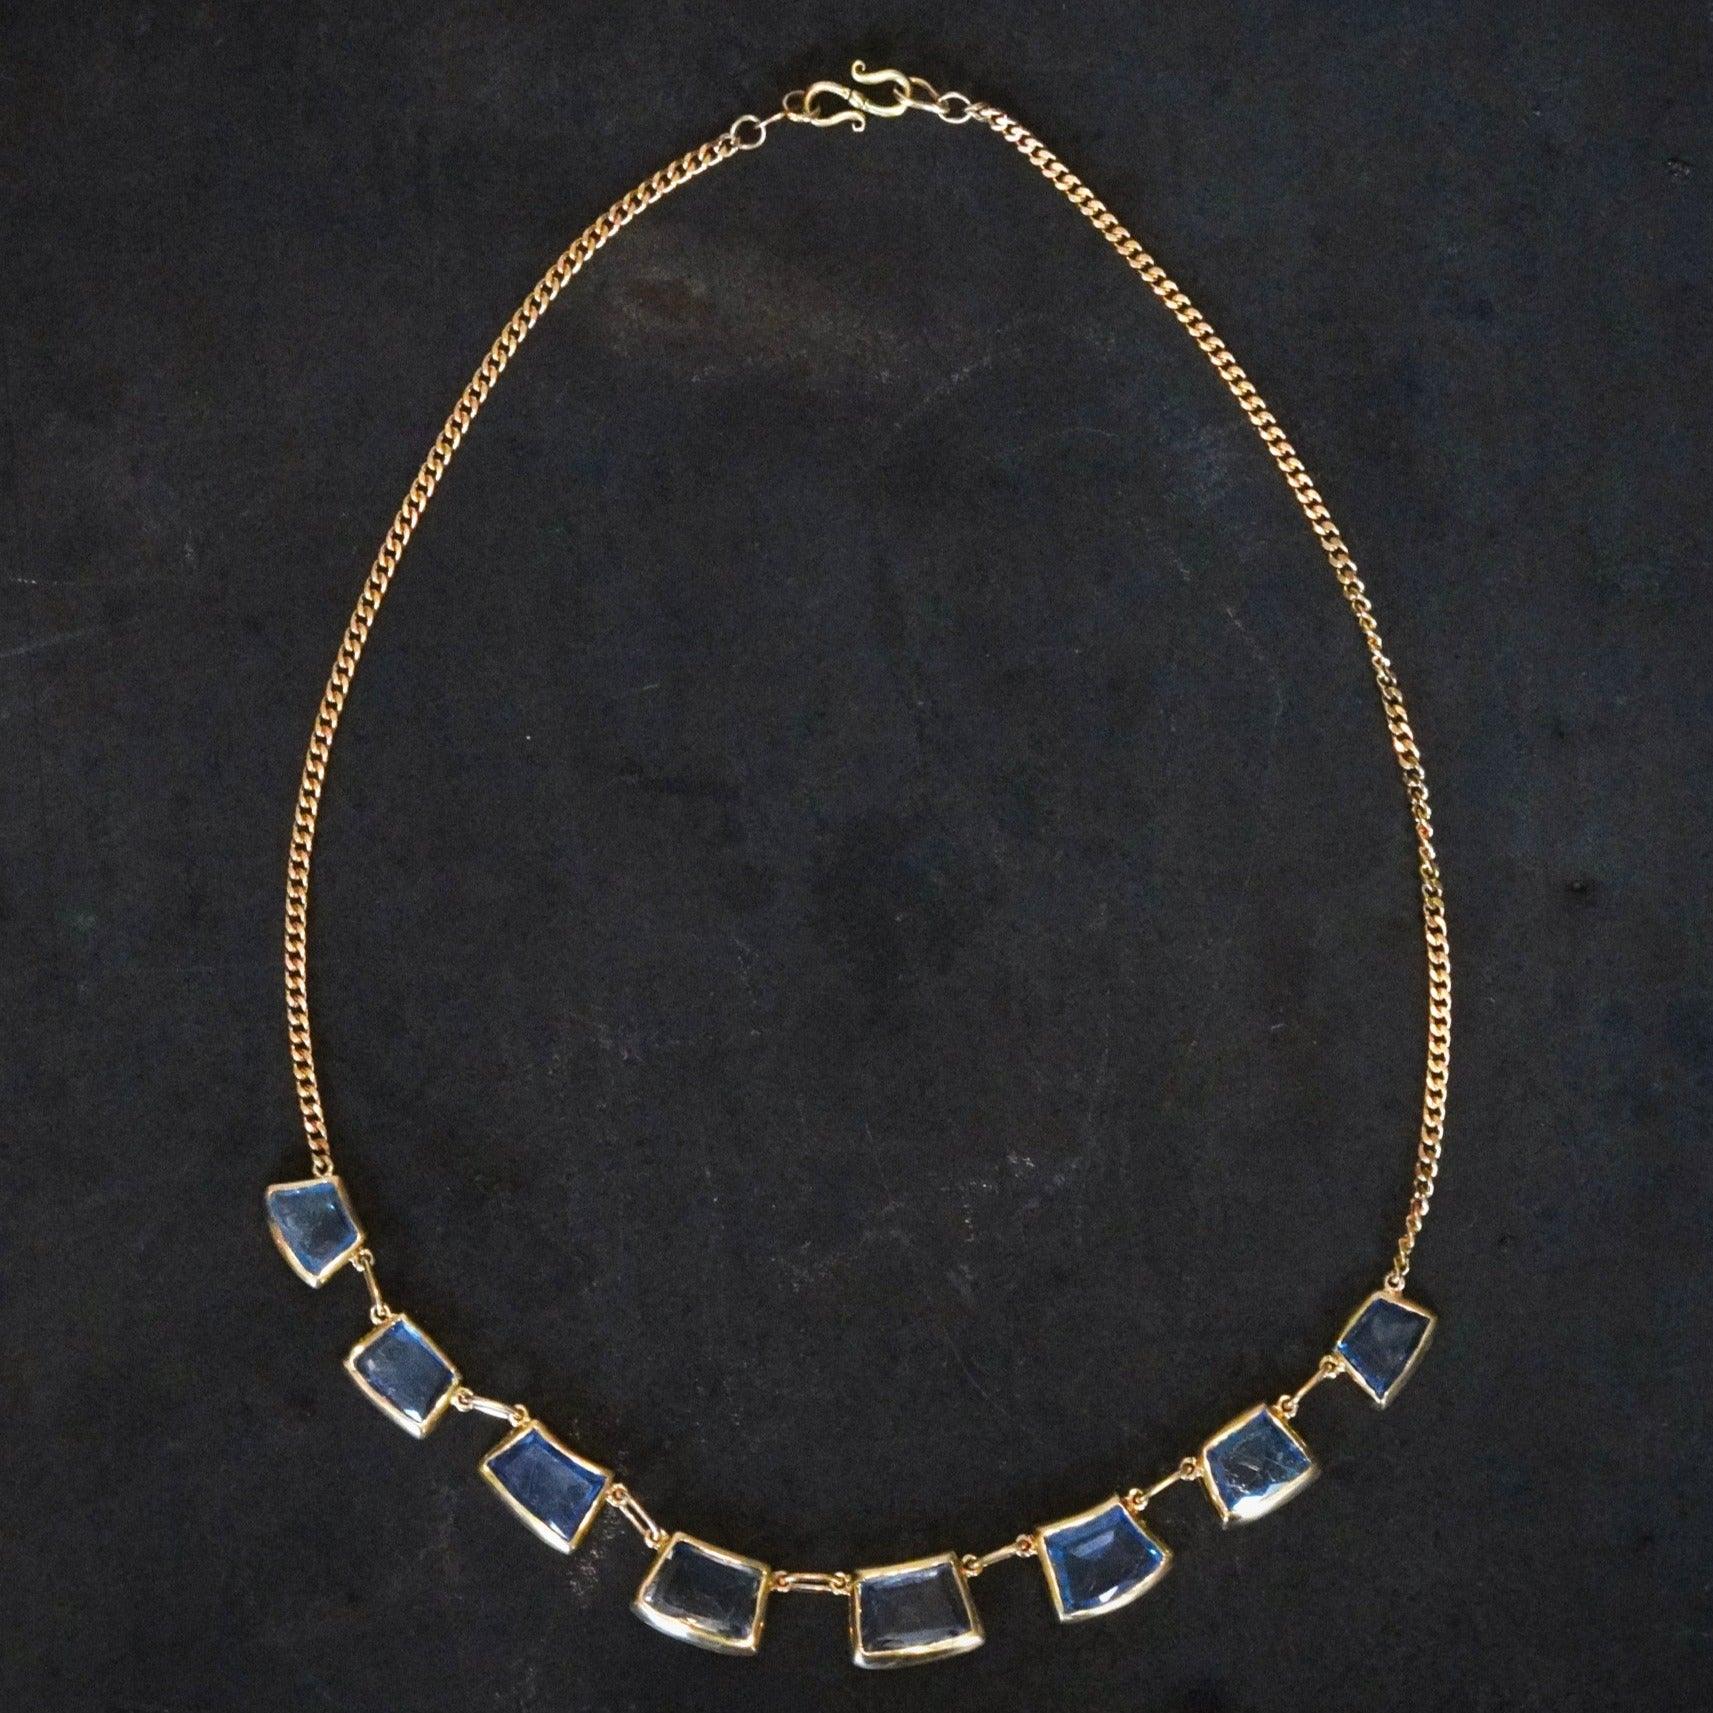 Jogani collection: Exquisite trapezoidal sapphire necklace with 22 CT gemstone